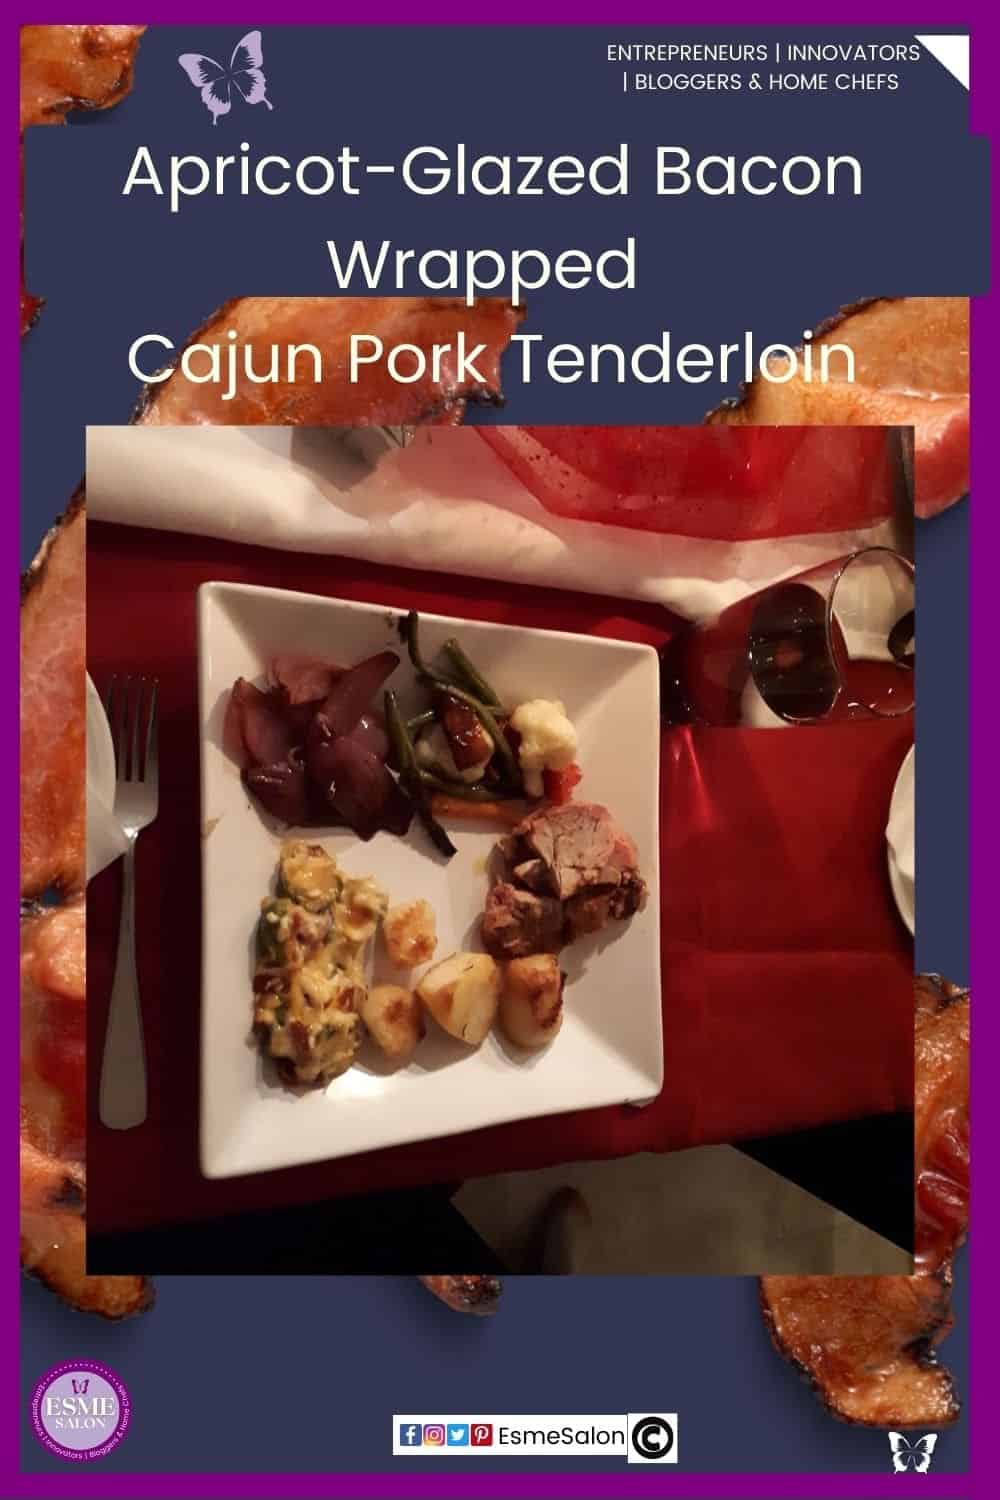 an image of a white serving plate with Apricot-Glazed Bacon Wrapped Cajun Pork Tenderloin with Baked potatoes, served with onions and green beans with cauliflower